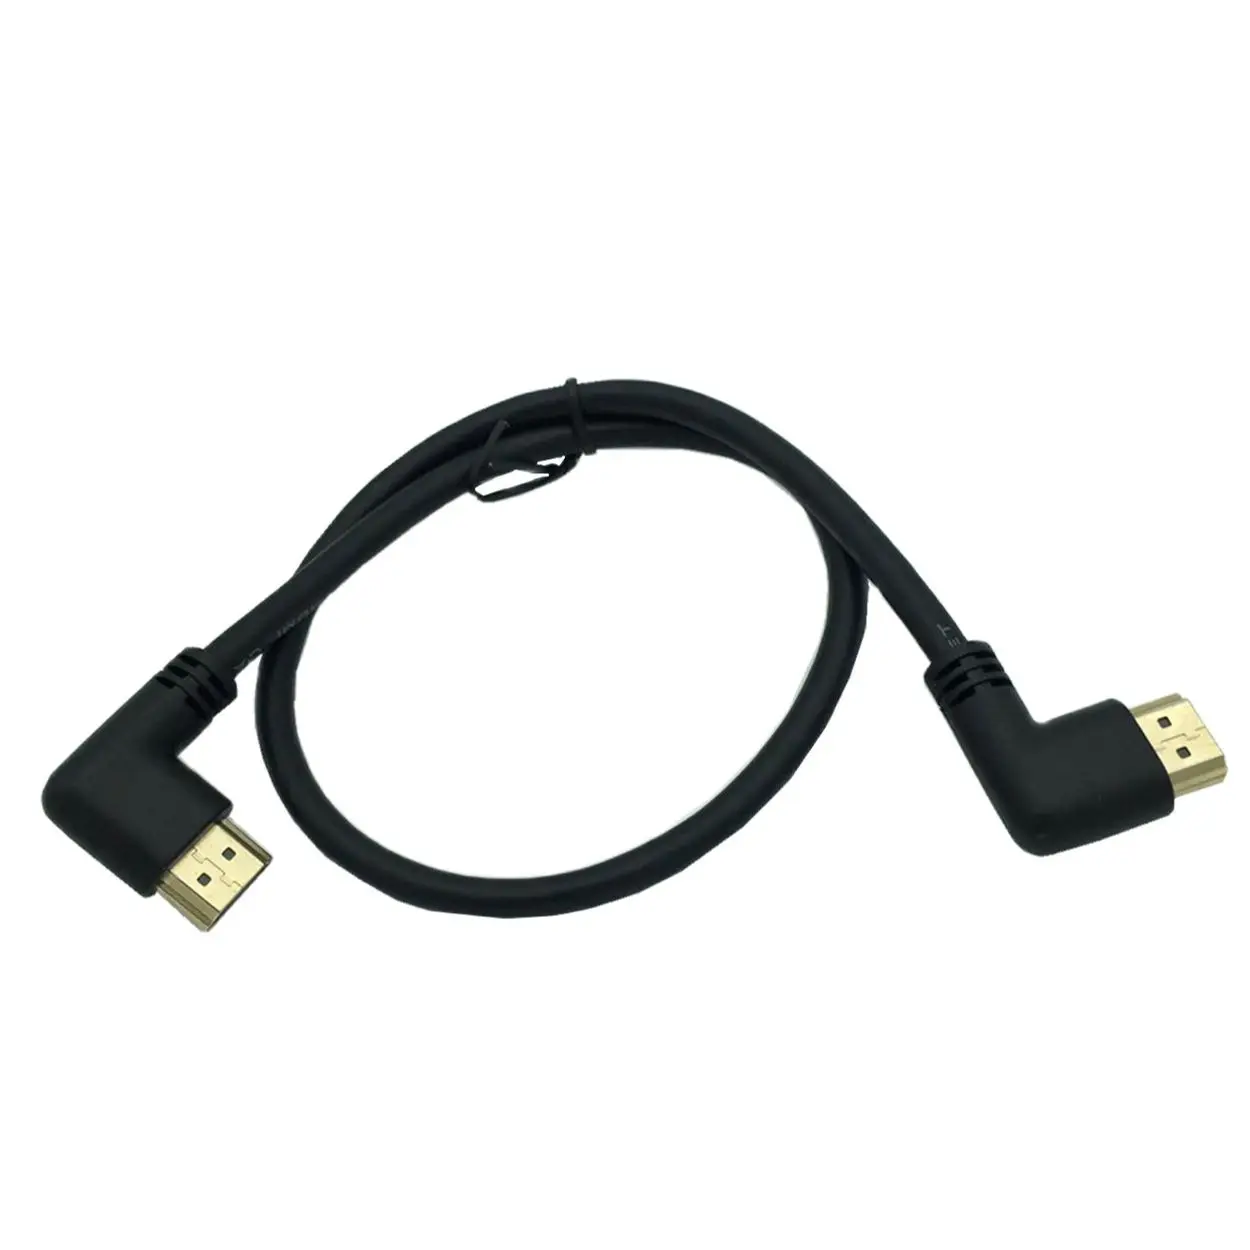 

HD-2.0 4K 3D Dual 90 Degree Left Angled HD-Male To Right Angled HDTV-compatible Male HDTV Cable For DVD PS3 PC 15cm-100cm